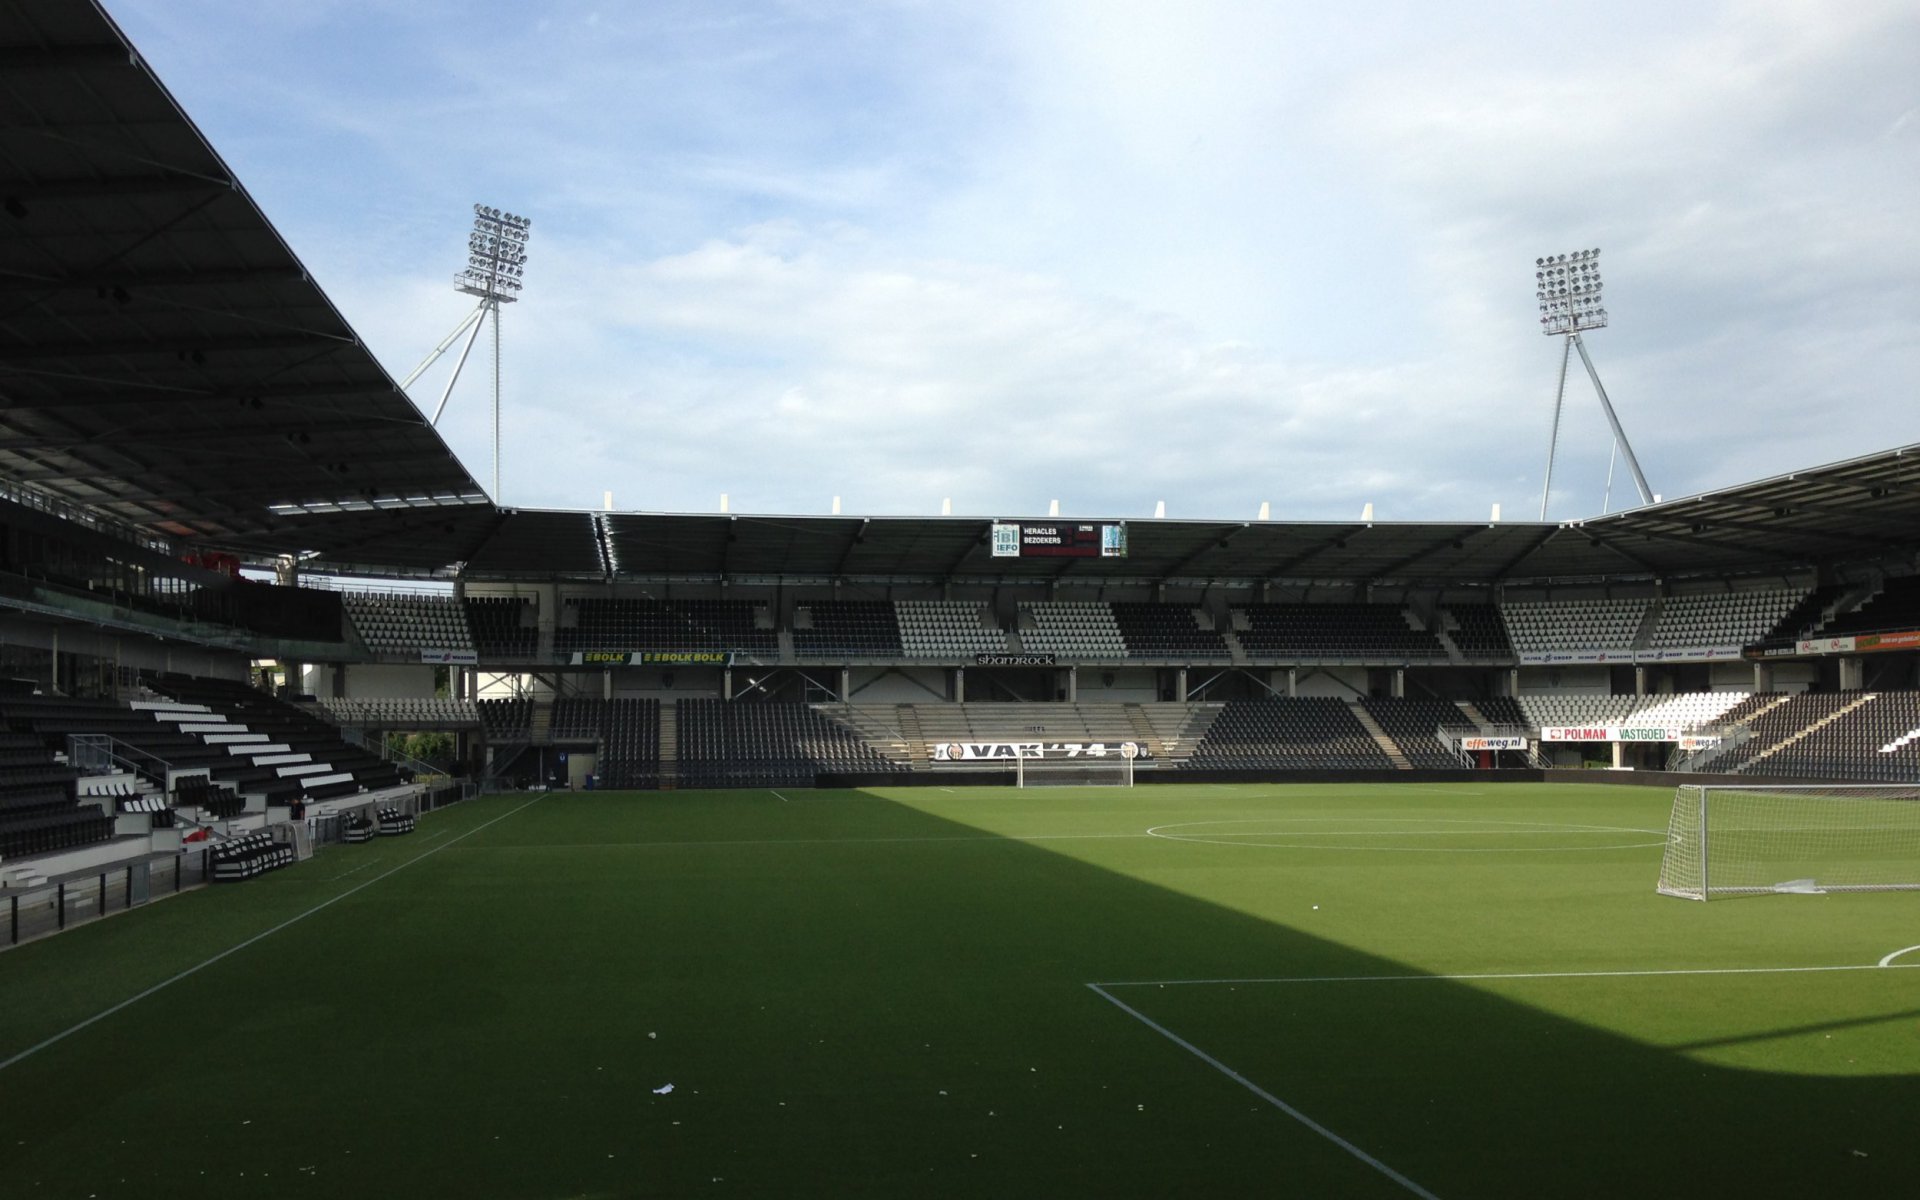 Palazzo - stadion Heracles Almelo 3